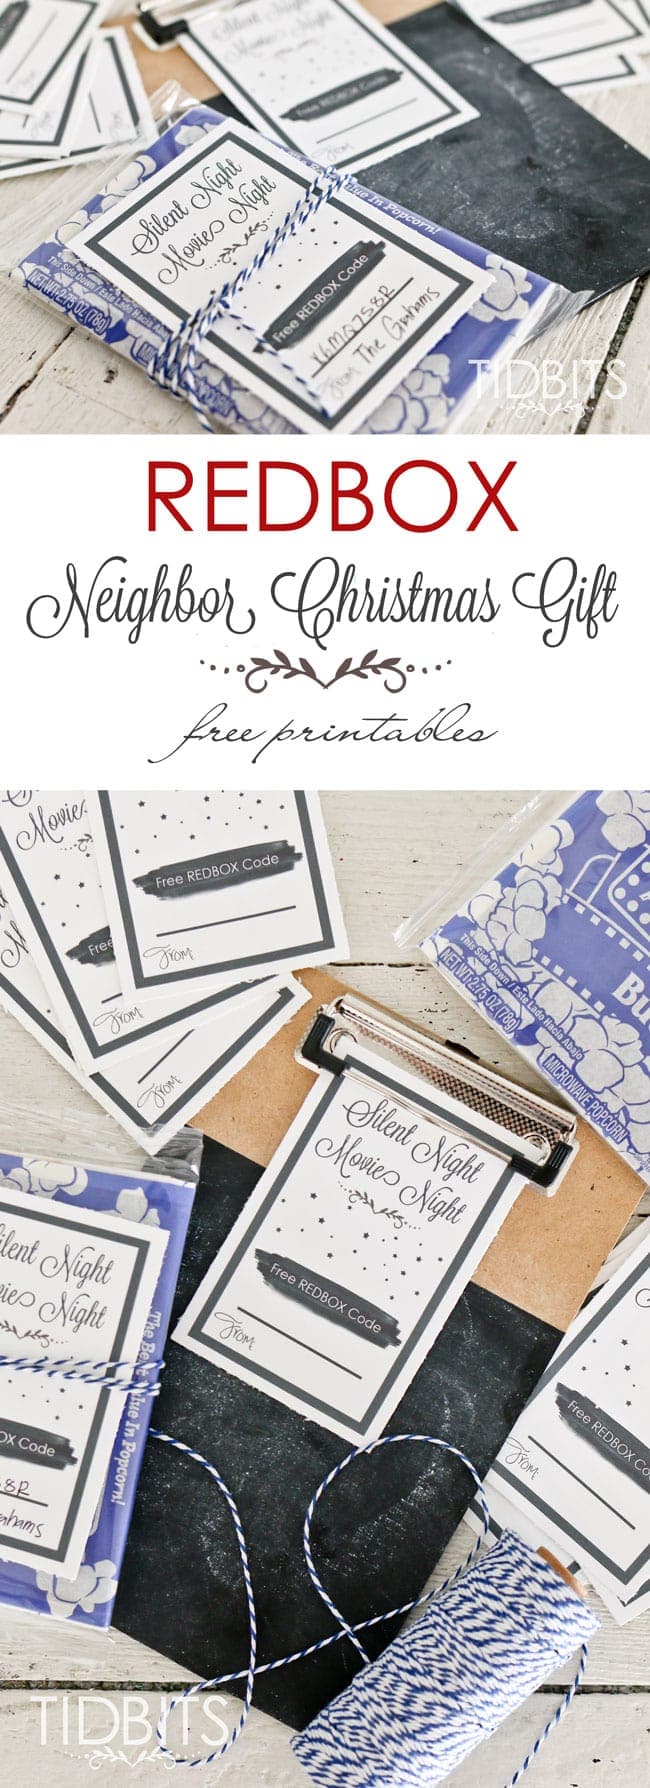 Redbox neighbor Christmas gift - Get your FREE printable, add a redbox code, attach it to a bag of popcorn - most practical and useful neighbor gift ever!